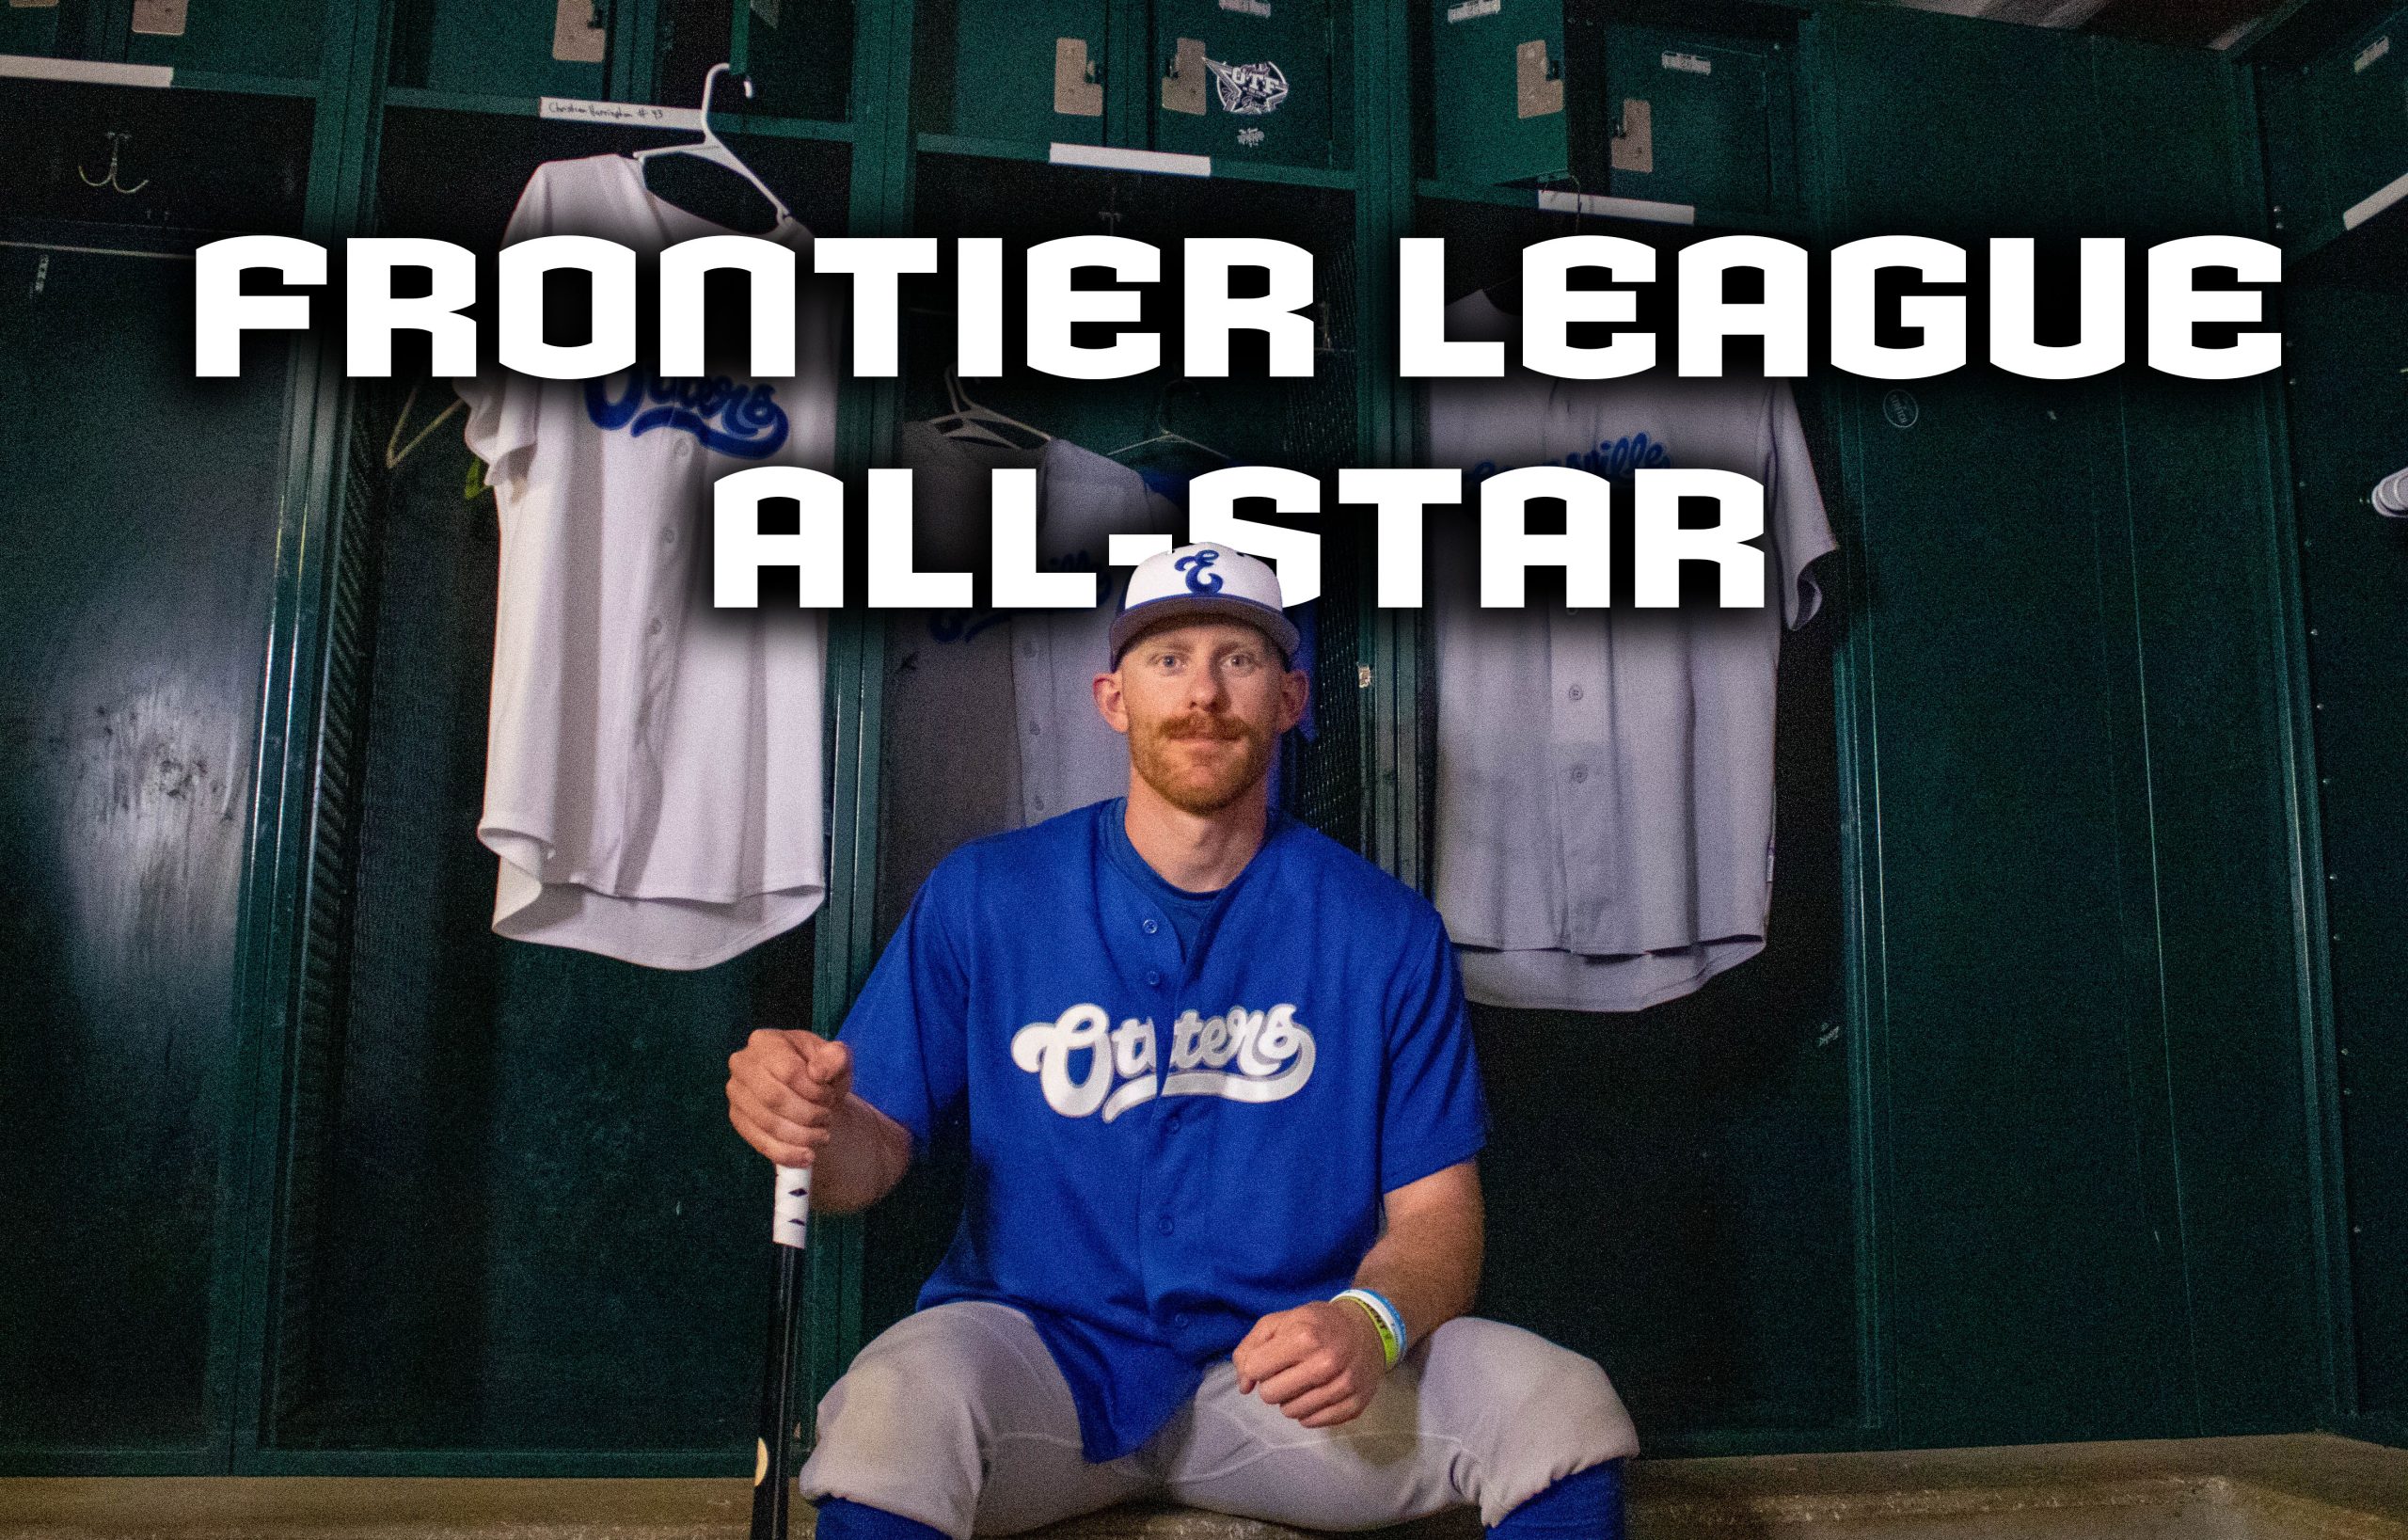 Frontier League has partnered with FloSports to be the Official